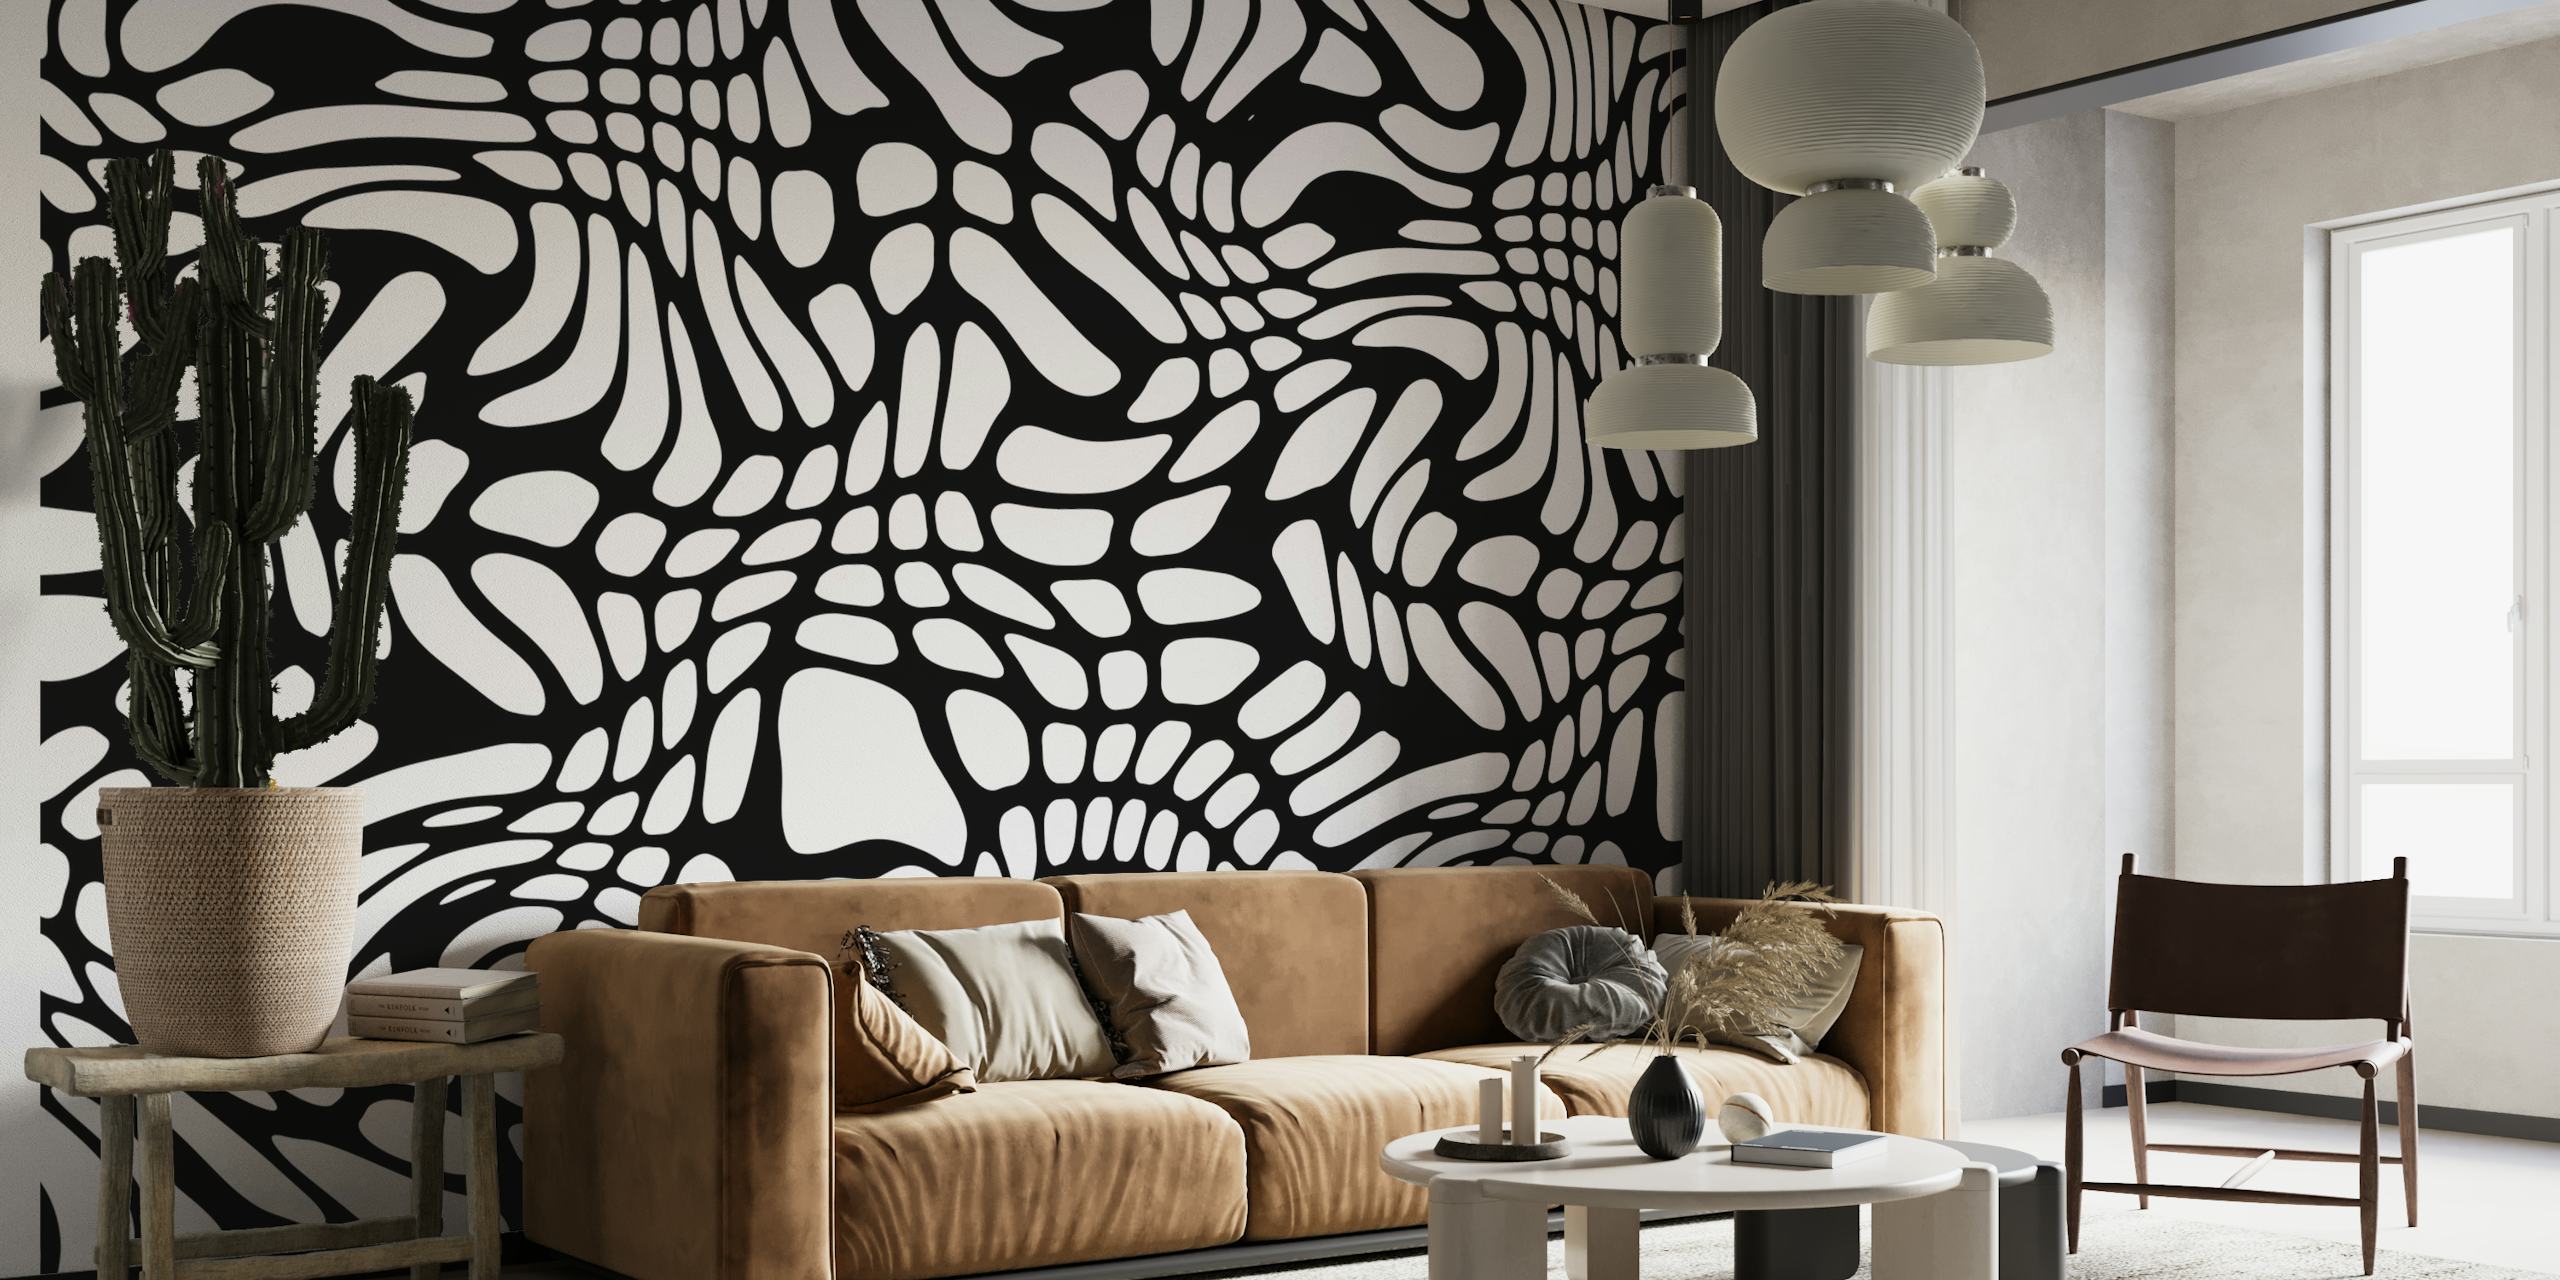 Black and white abstract shapes wall mural for modern interior decor